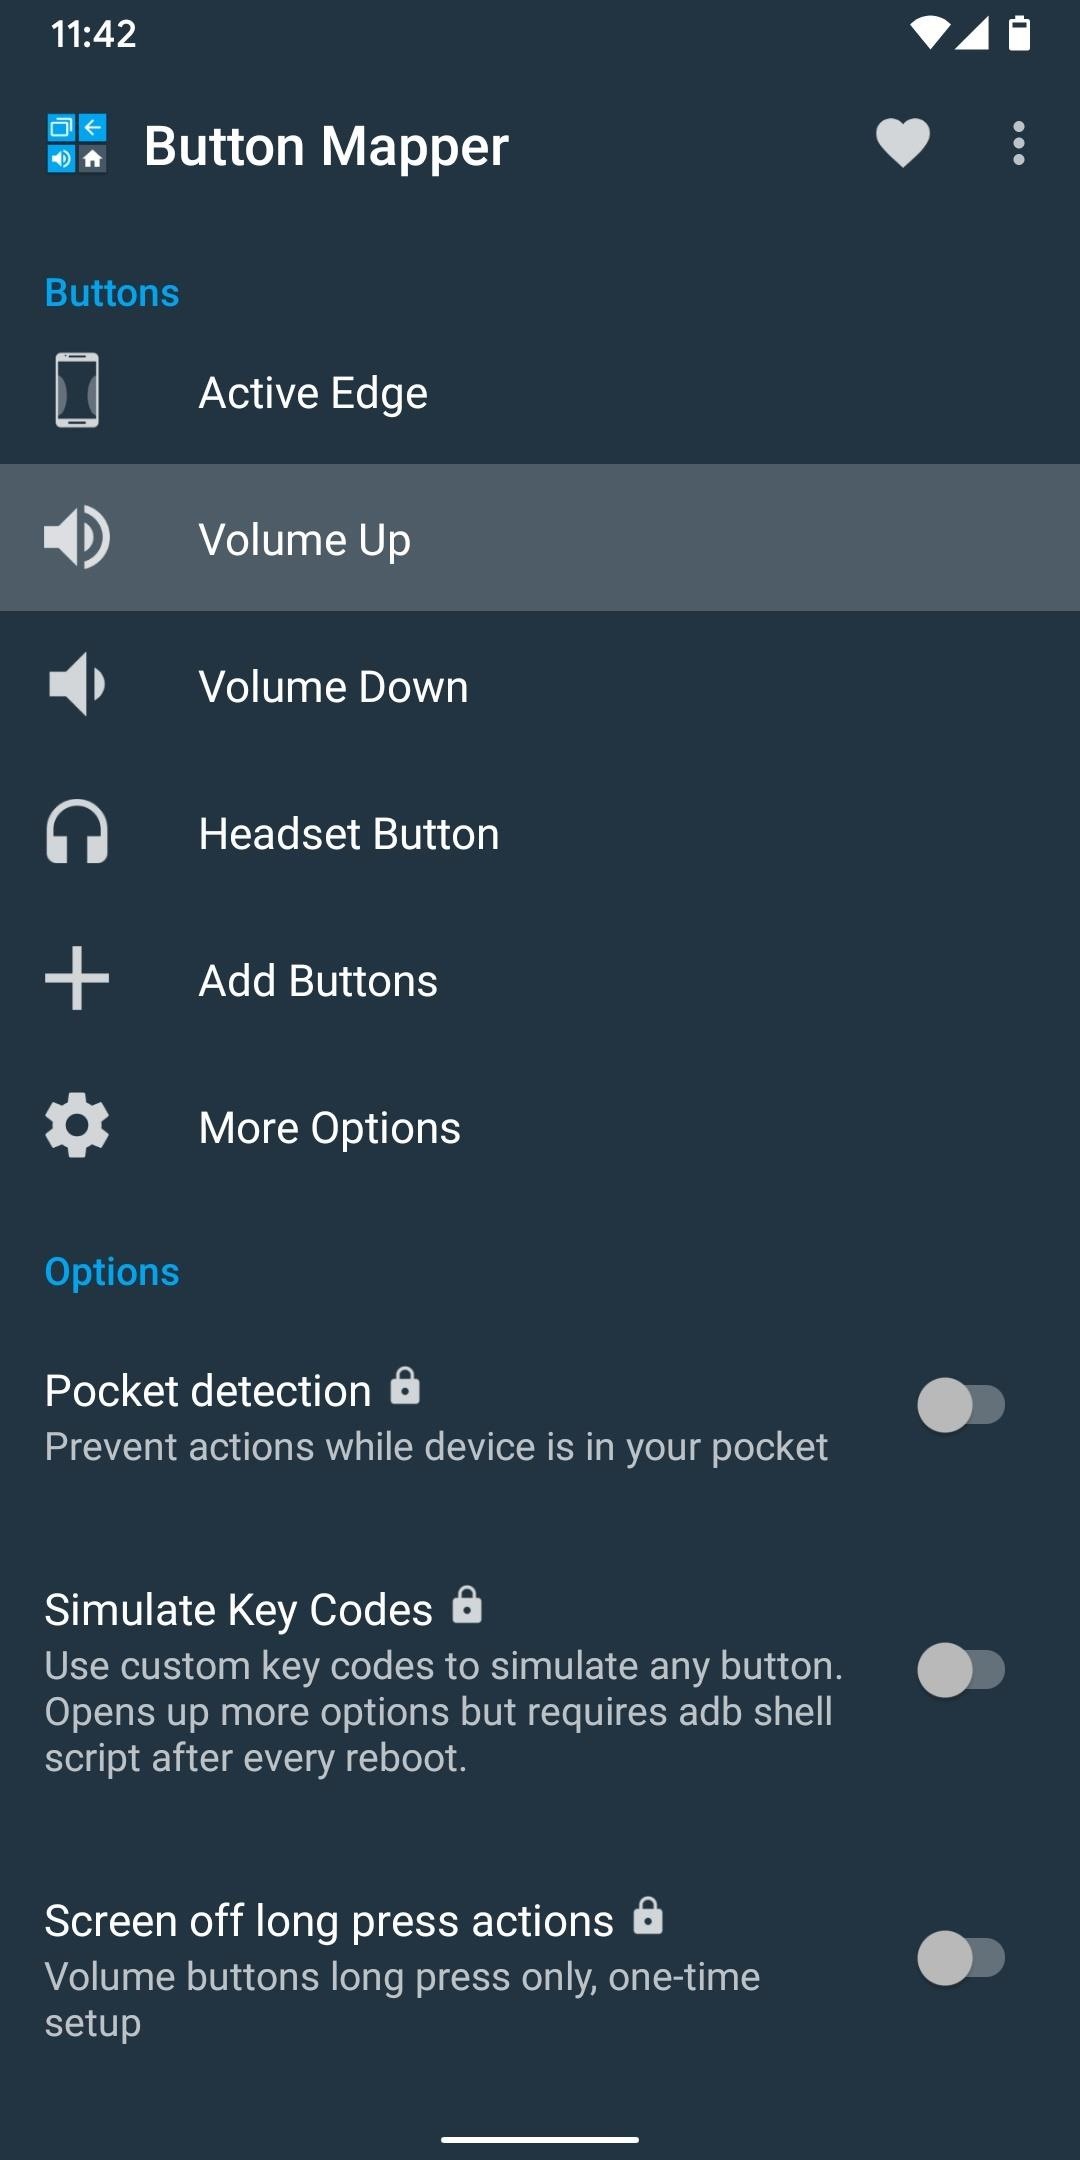 Turn Any Button on Your Phone into a Dedicated Google Assistant Key